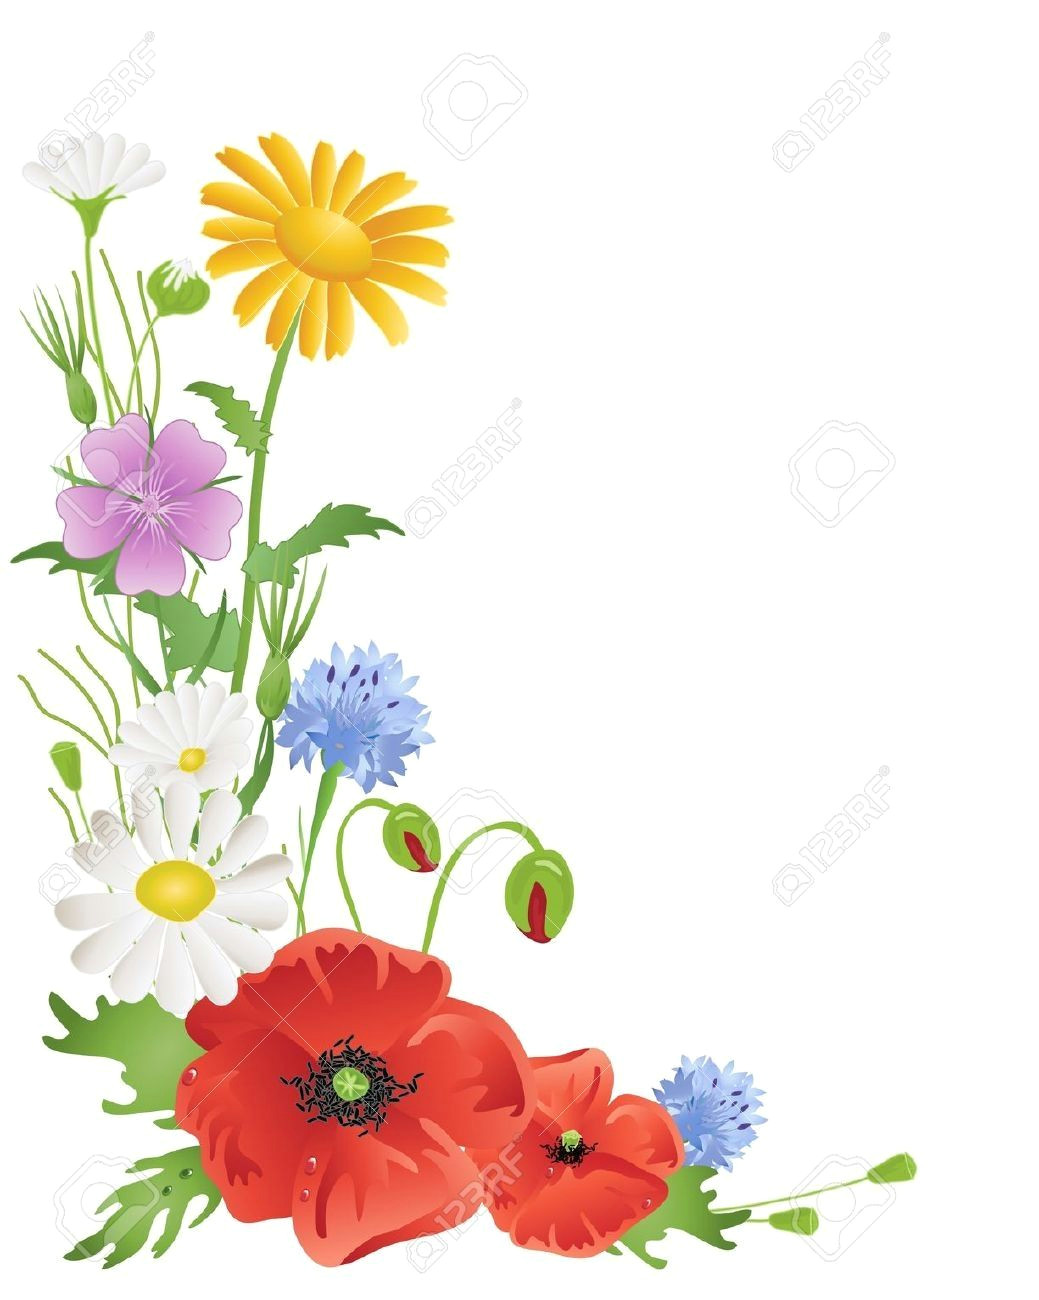 Drawing Of Flowers Border Drawings Of A Bunch Of Wild Flowers Wildflowers Borders Clipart